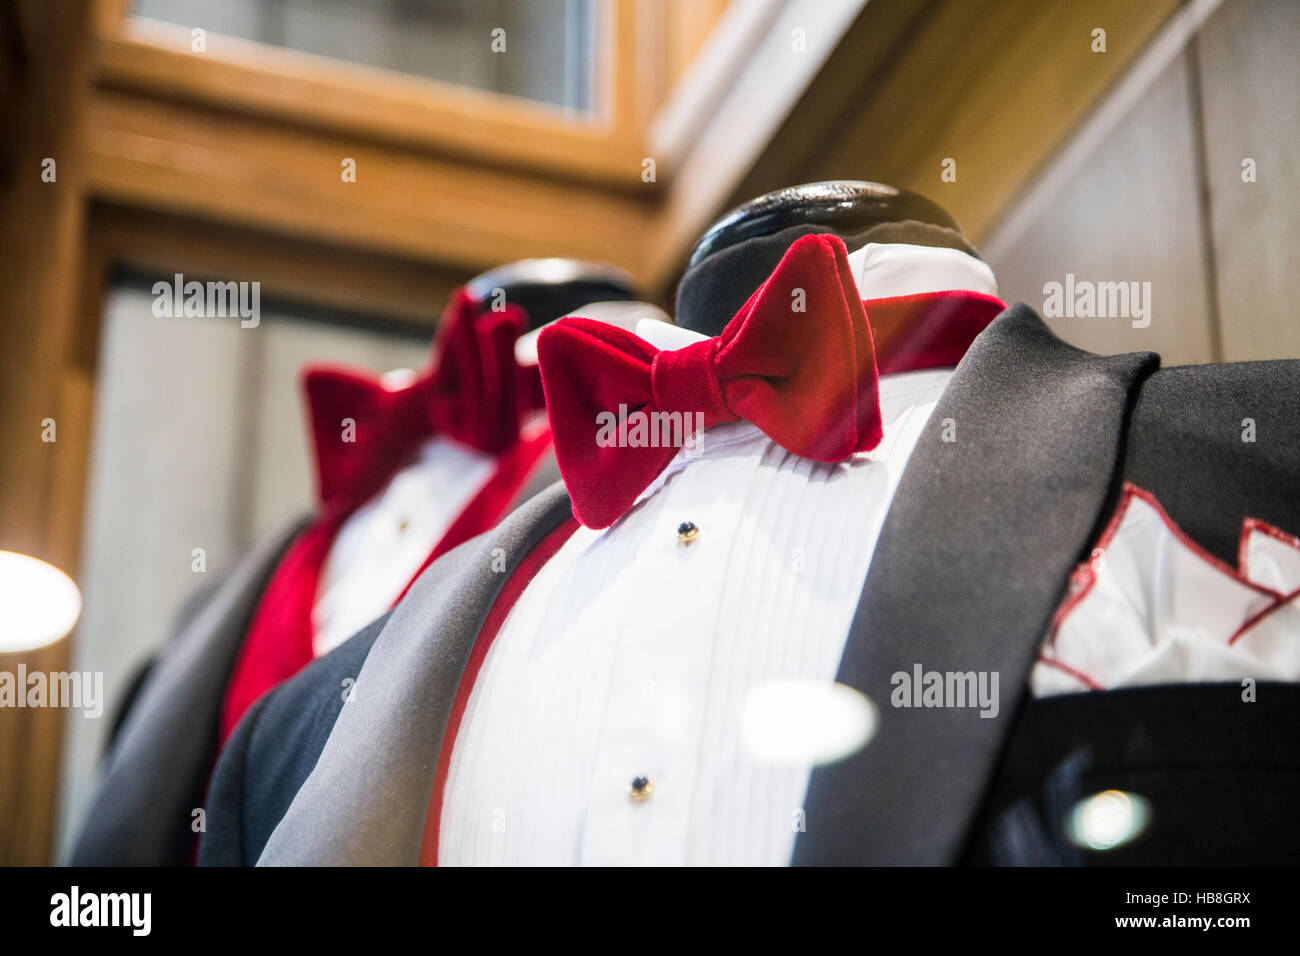 Tailored suits with red bow ties Stock Photo